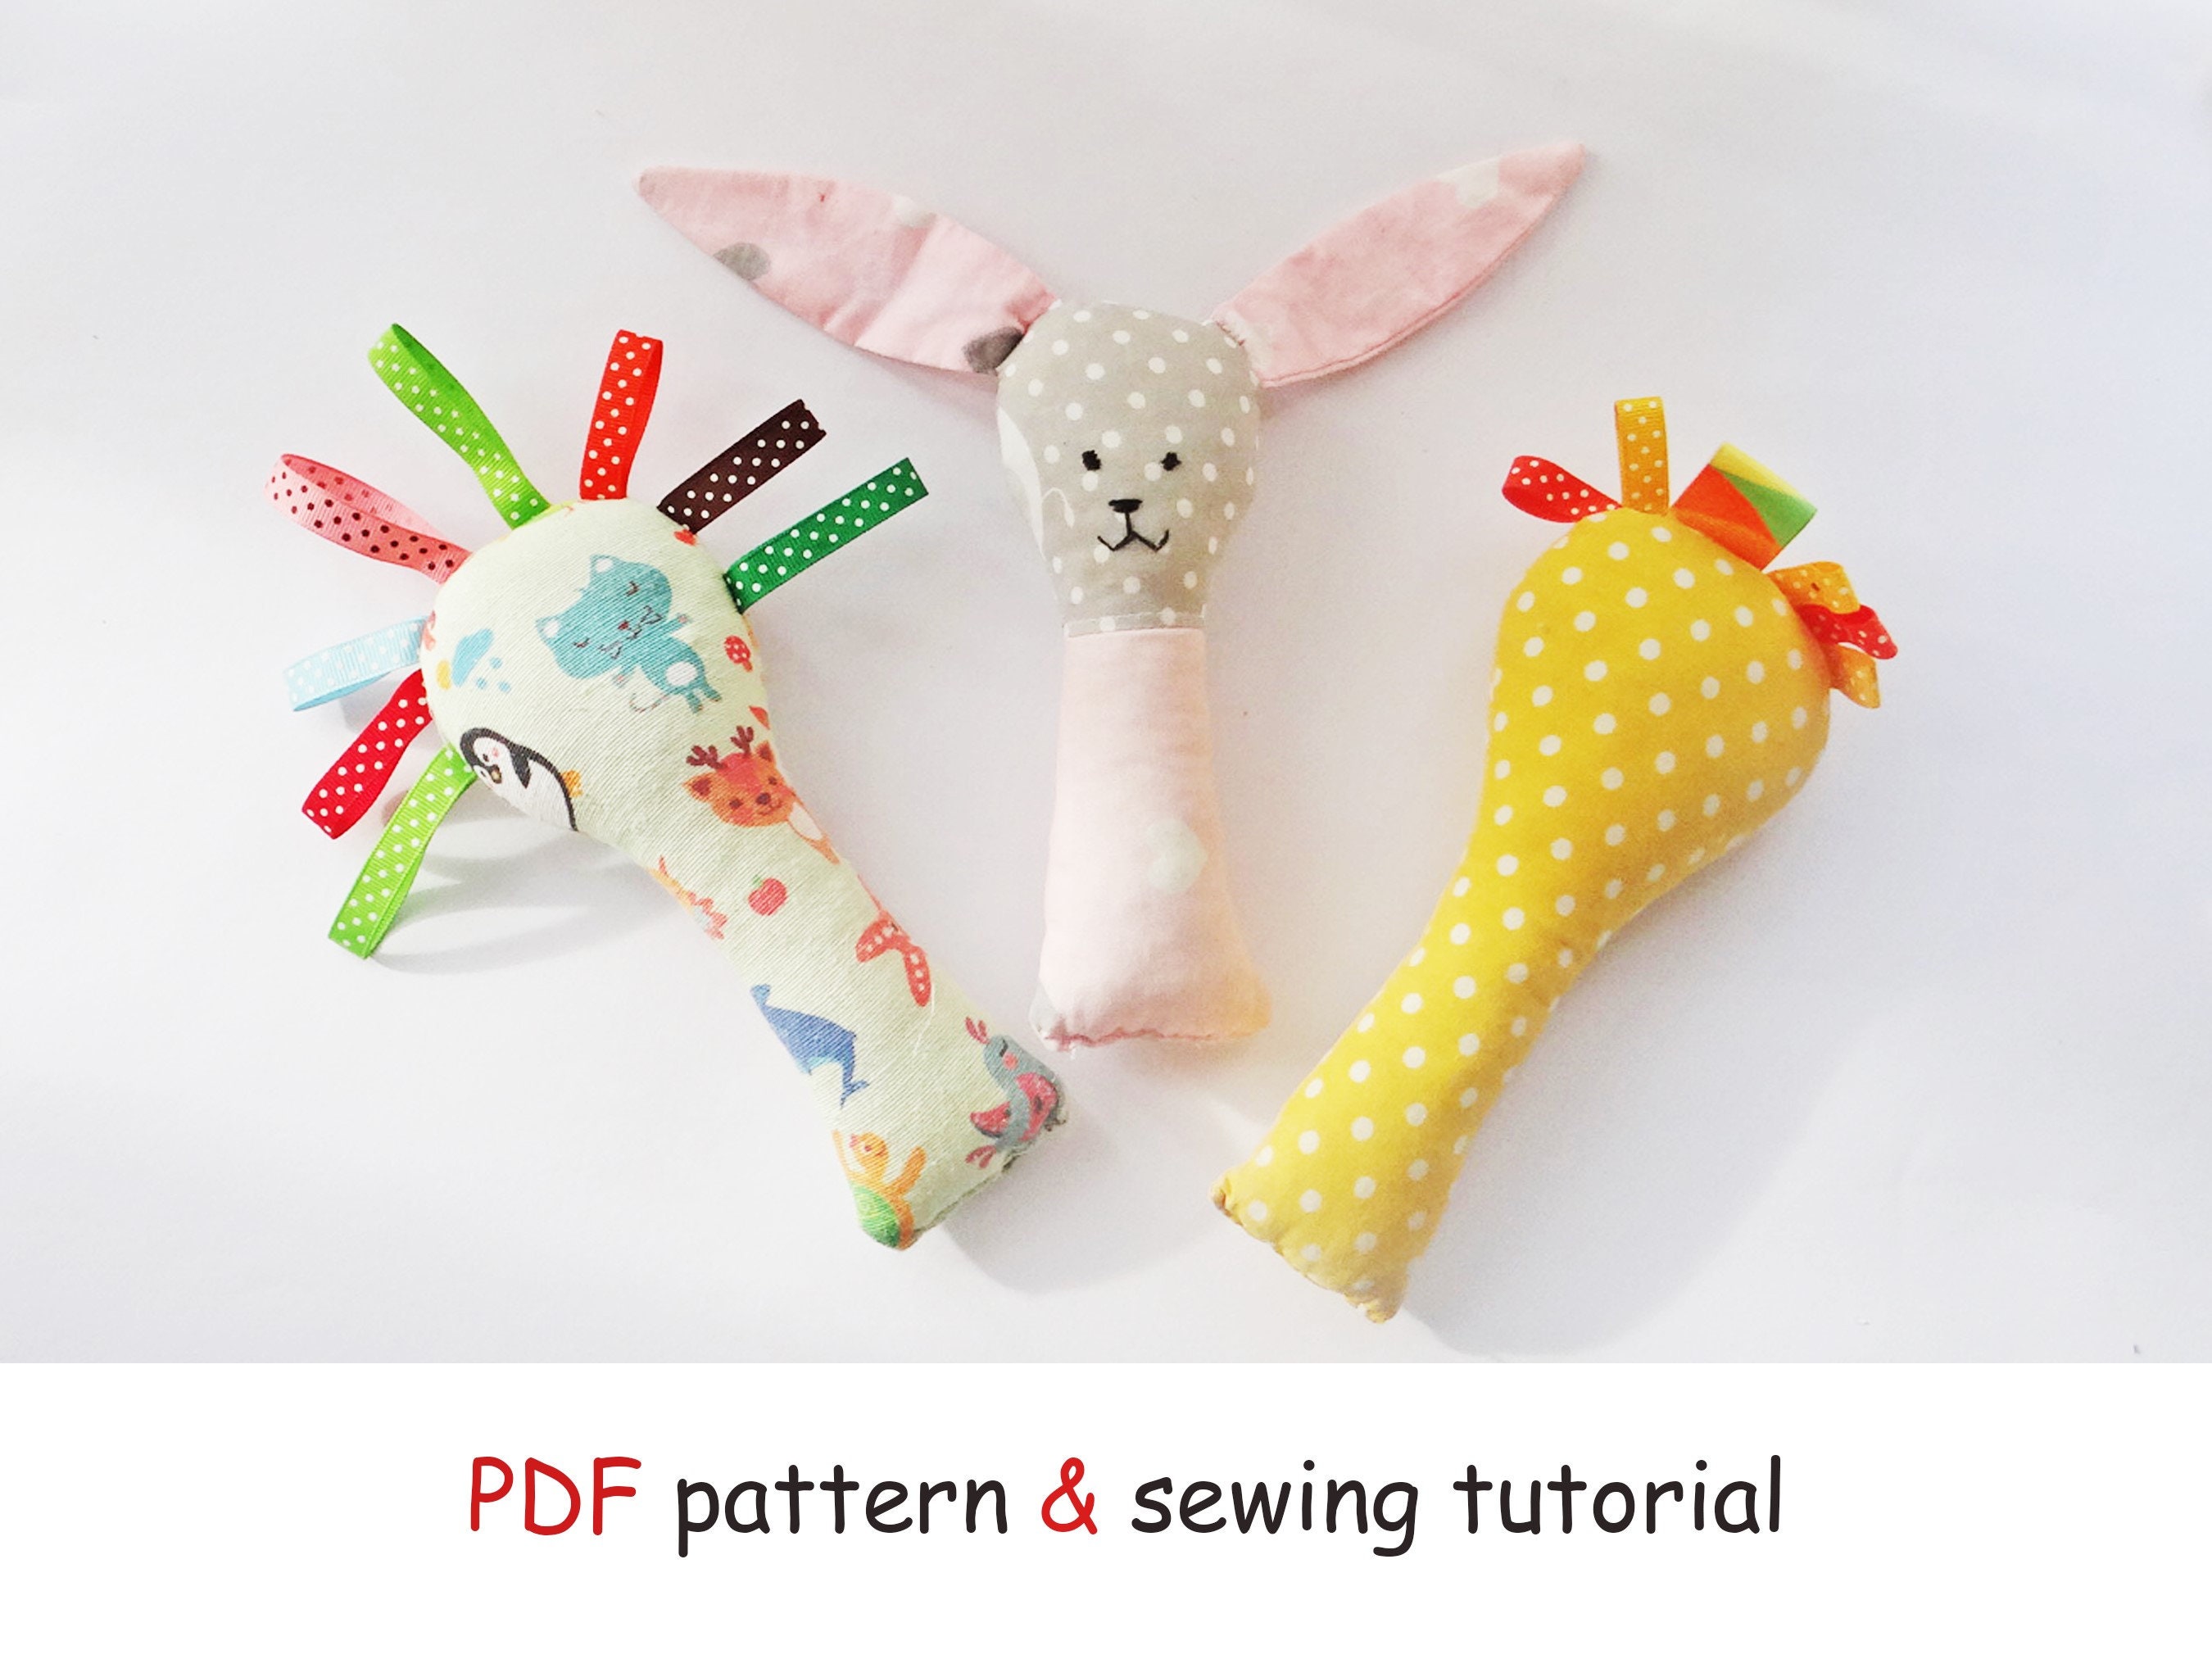 How to Sew DIY Baby Toys : Round-up! - Making Things is Awesome